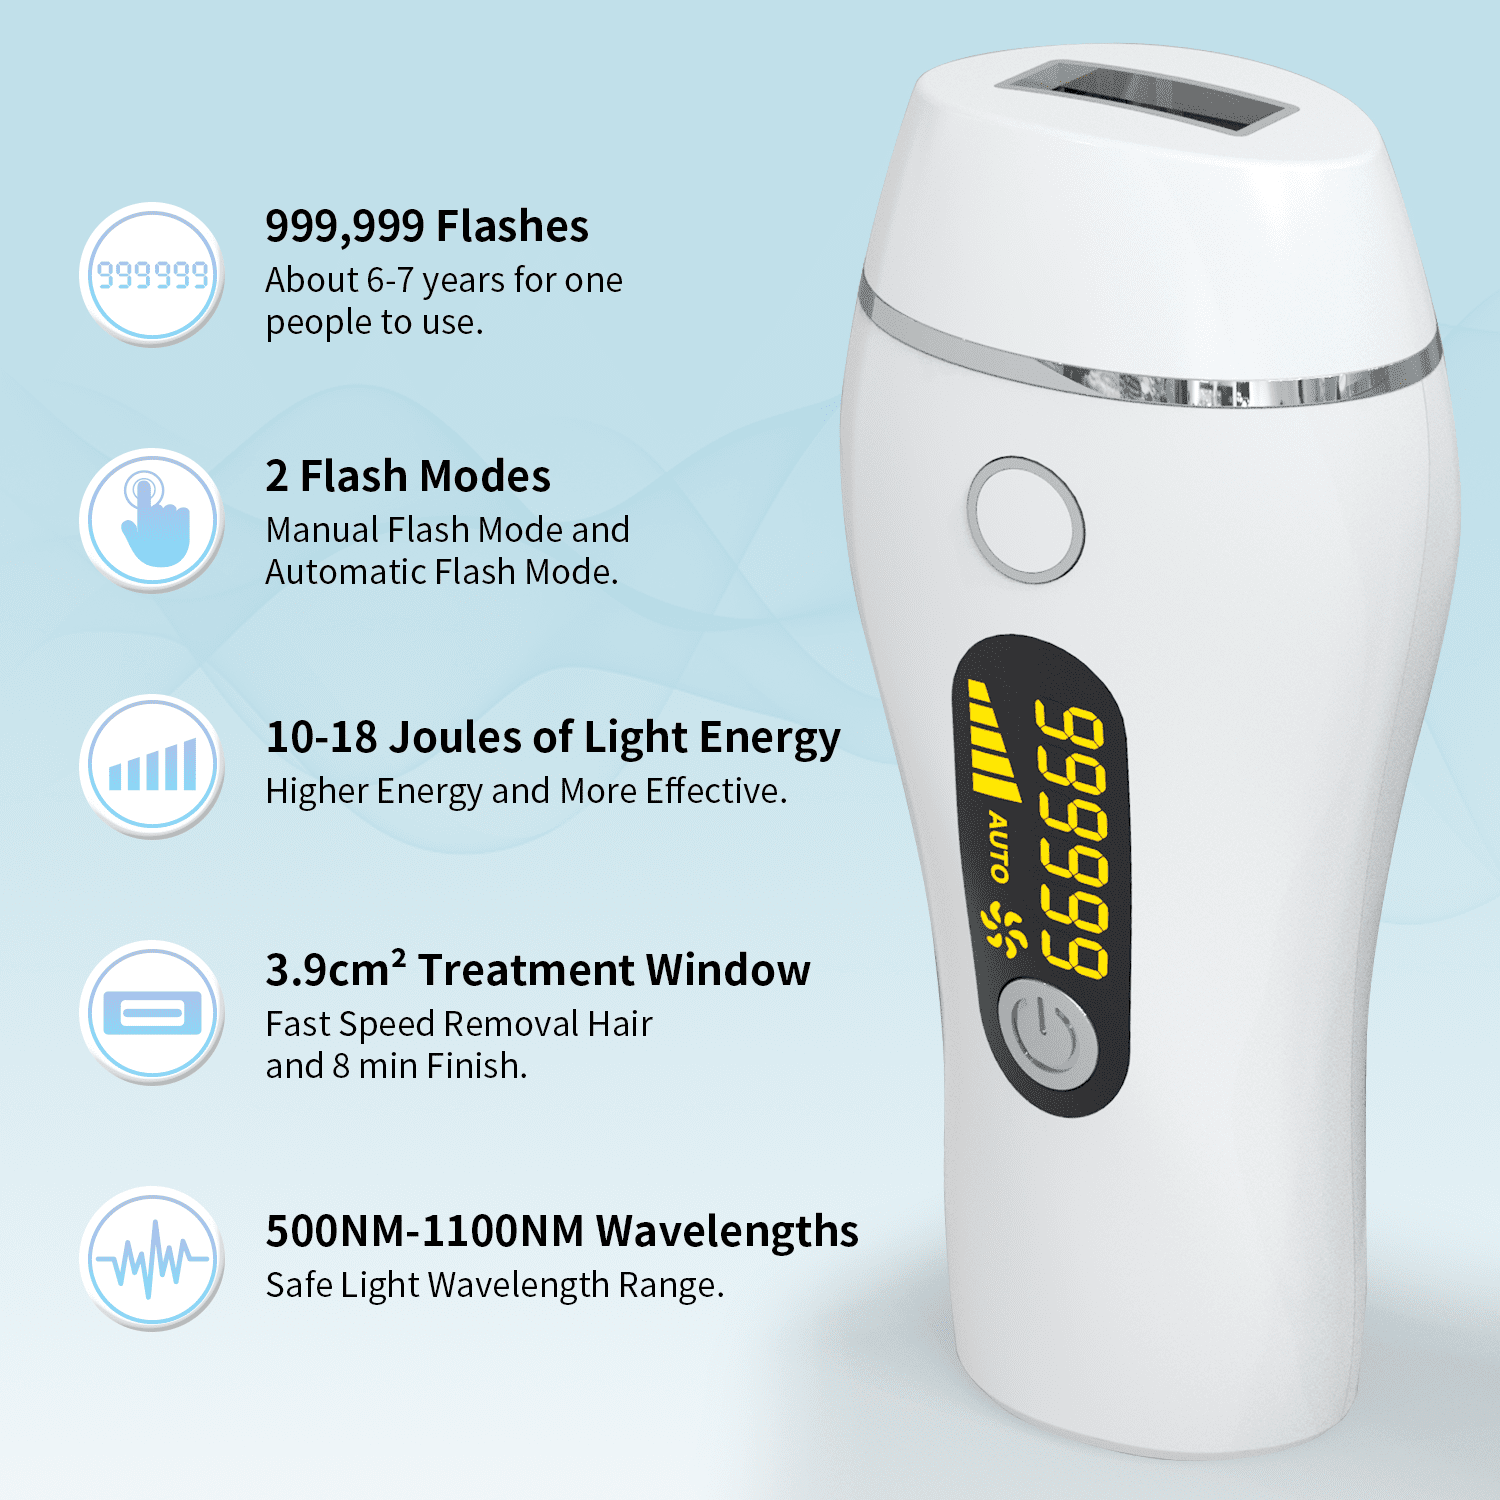 UUPAS Permanent Laser Hair Removal Device